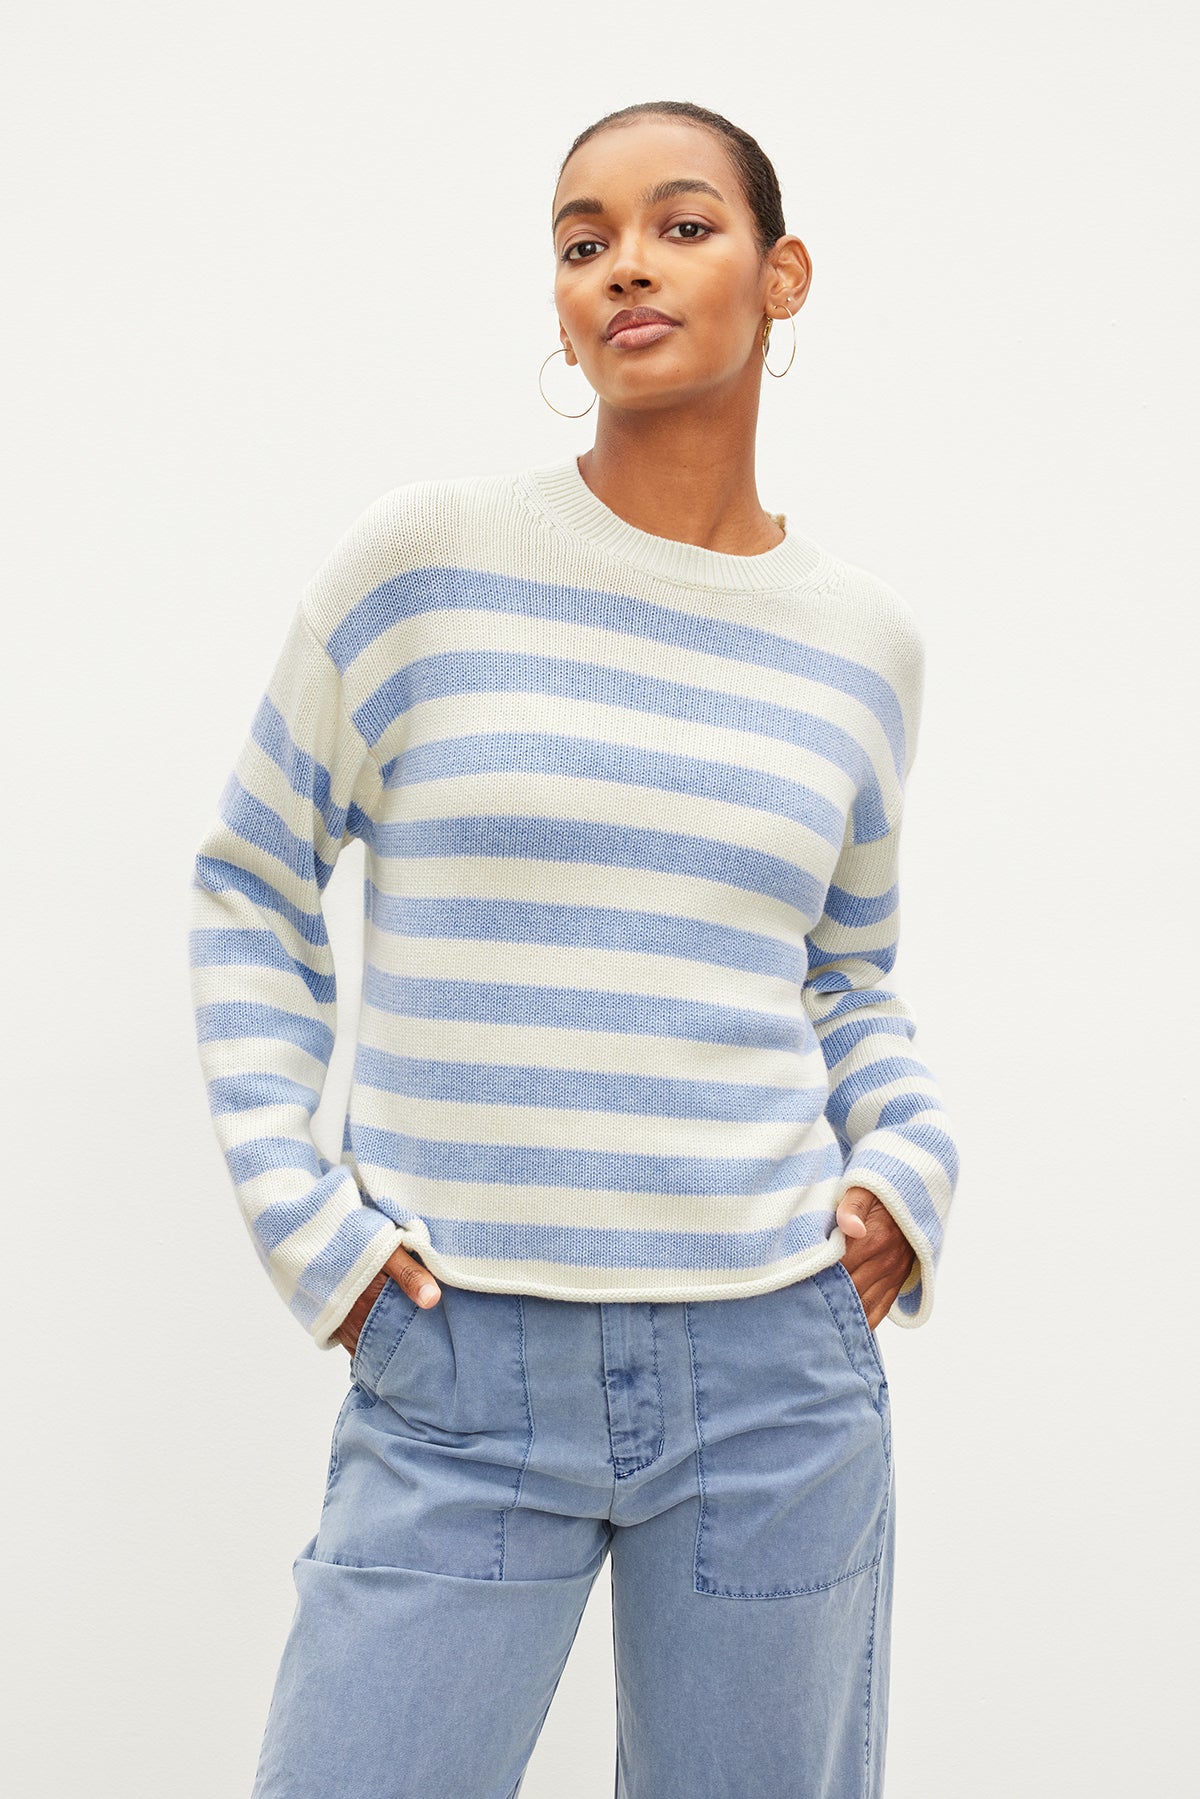   The modern model is wearing a blue and white striped LEX STRIPED CREW NECK SWEATER by Velvet by Graham & Spencer. 